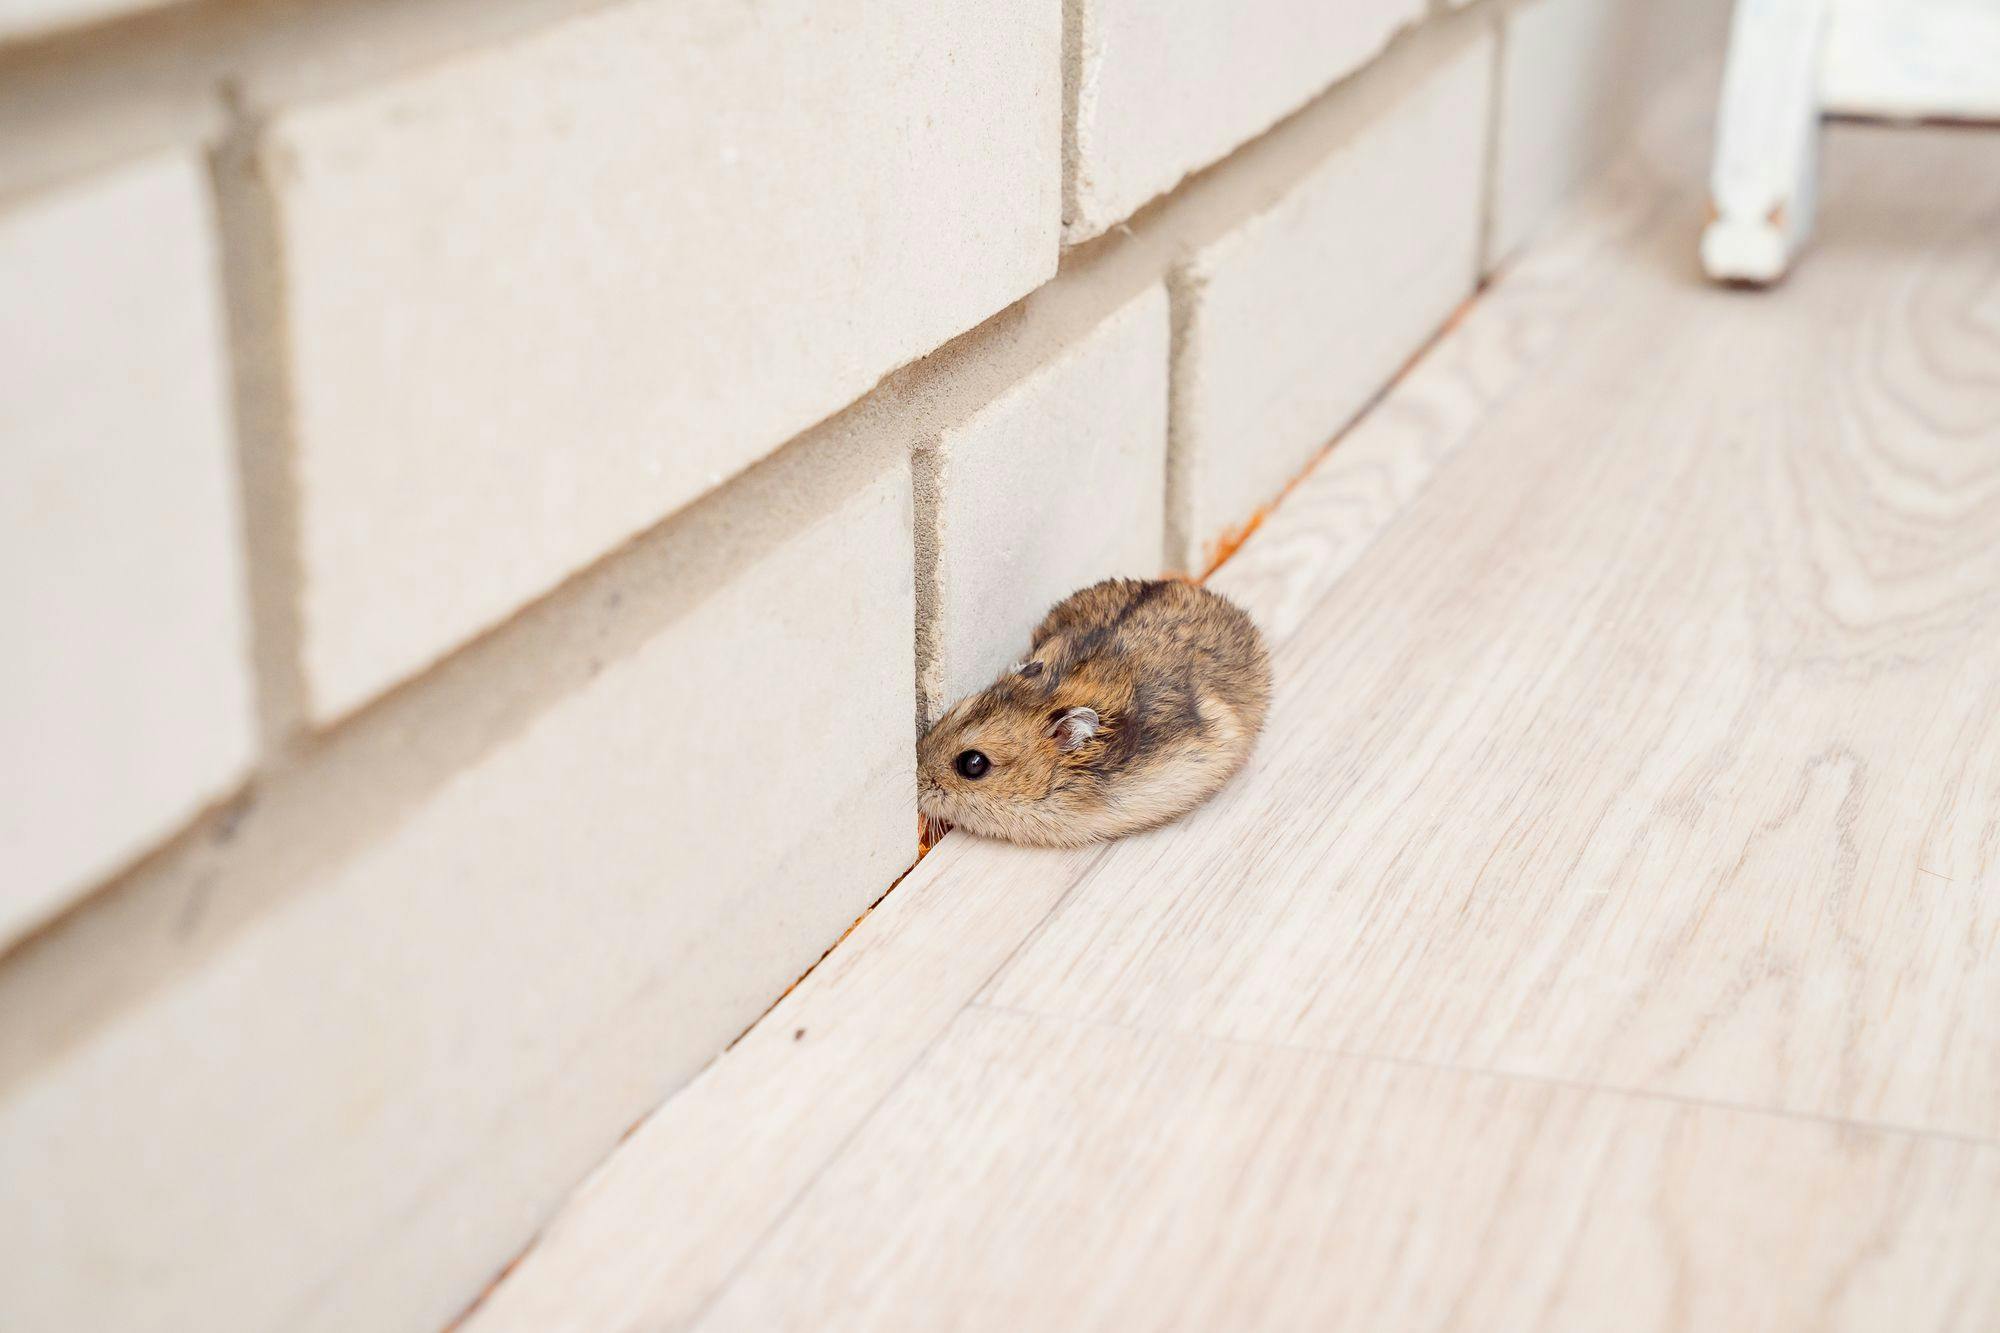 Explore the importance of inspections in rodent exclusion. Discover tools, materials, and safety precautions for effective pest control.